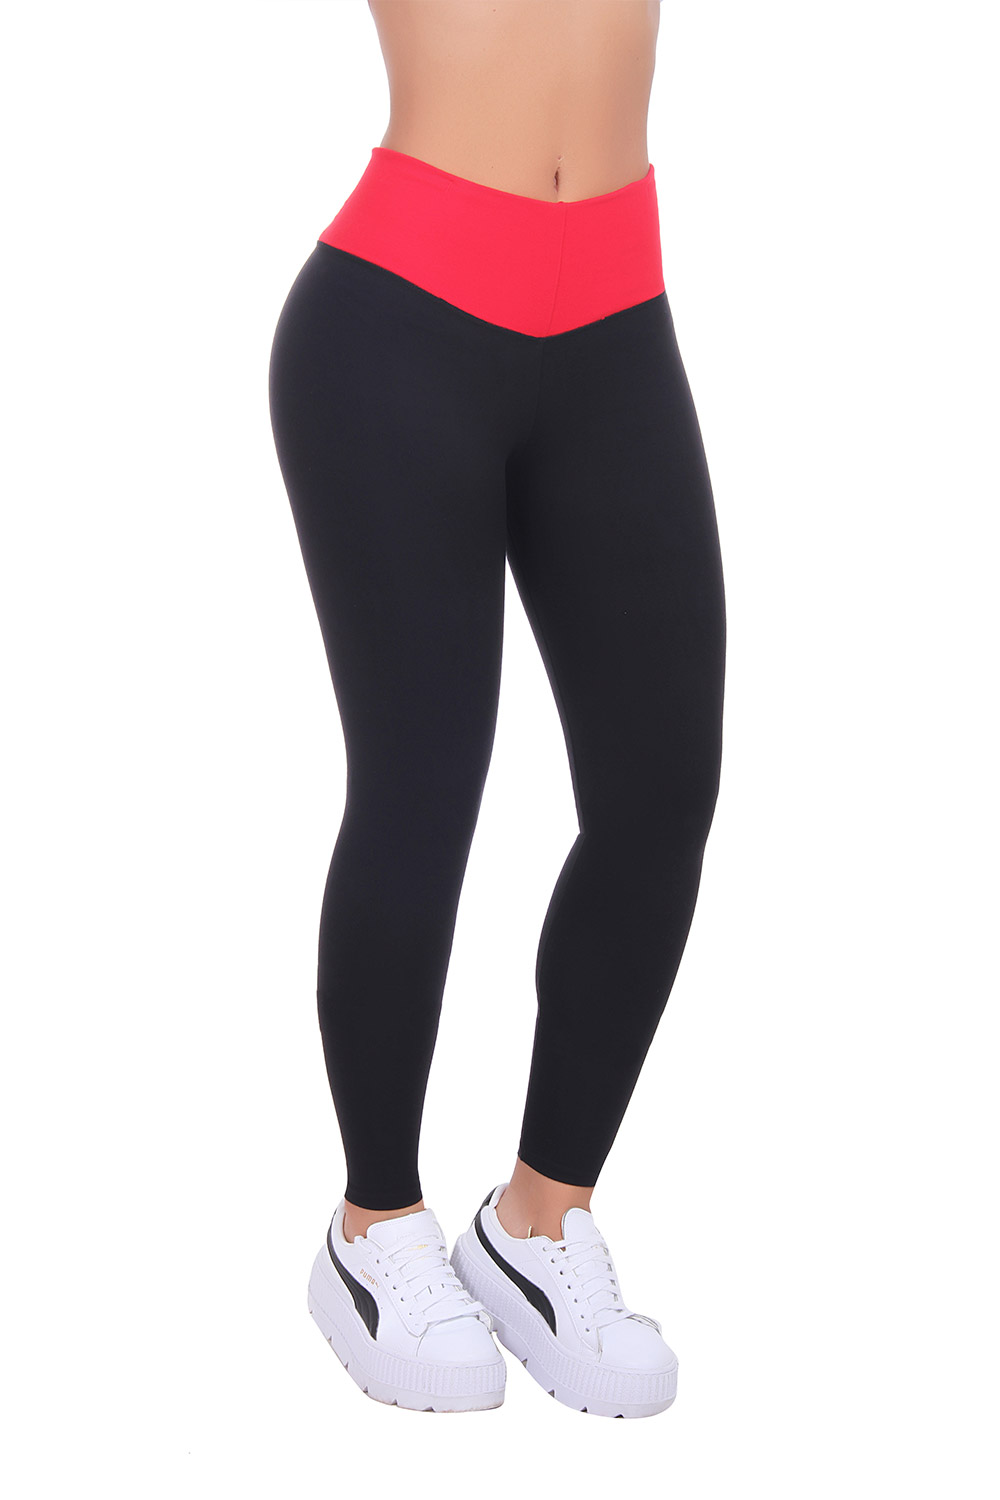 Bon Bon Up Black Leggings with Colored Waistband with Internal Body Shaper and Butt Lifter, Multiple Styles